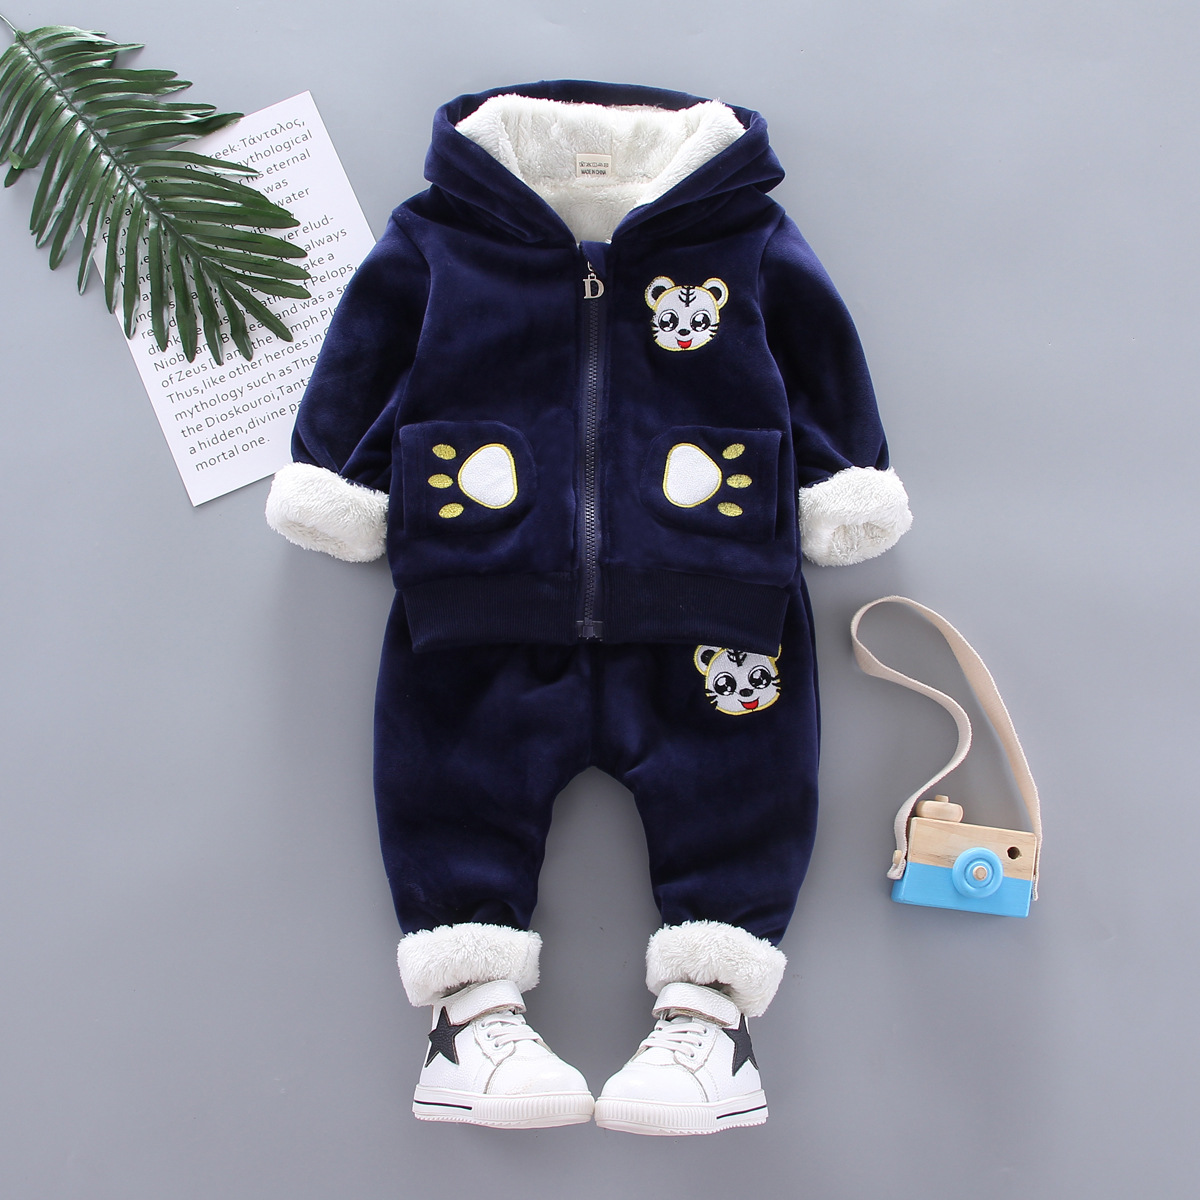 The New Children's clothing sports suit 13